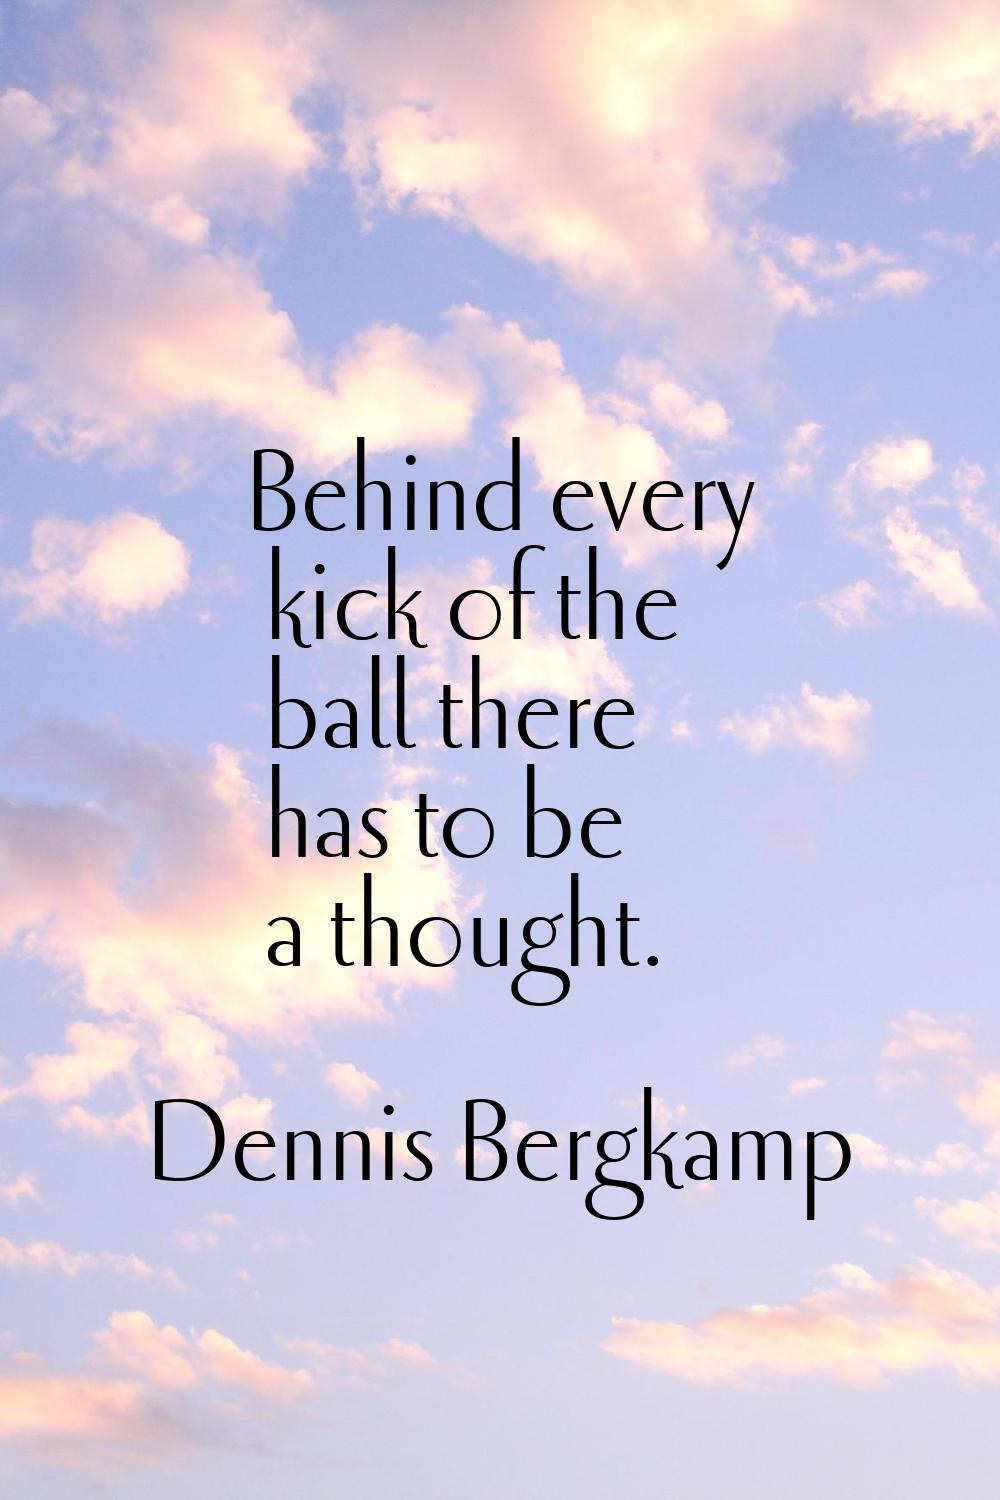 Behind every kick of the ball there has to be a thought.